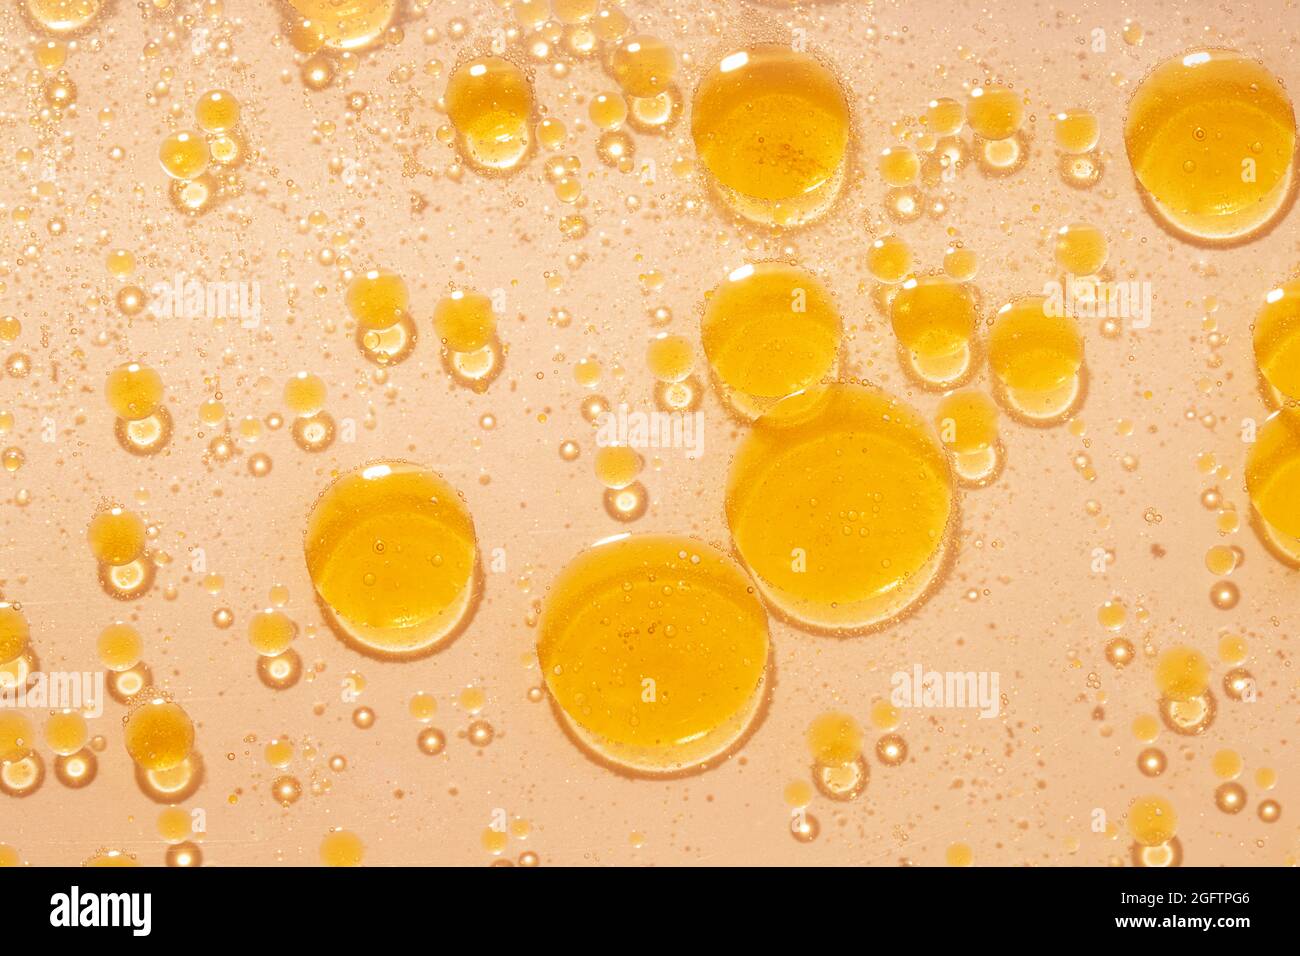 Abstract oil bubble background. Orange color oil, close-up top view. Stock Photo